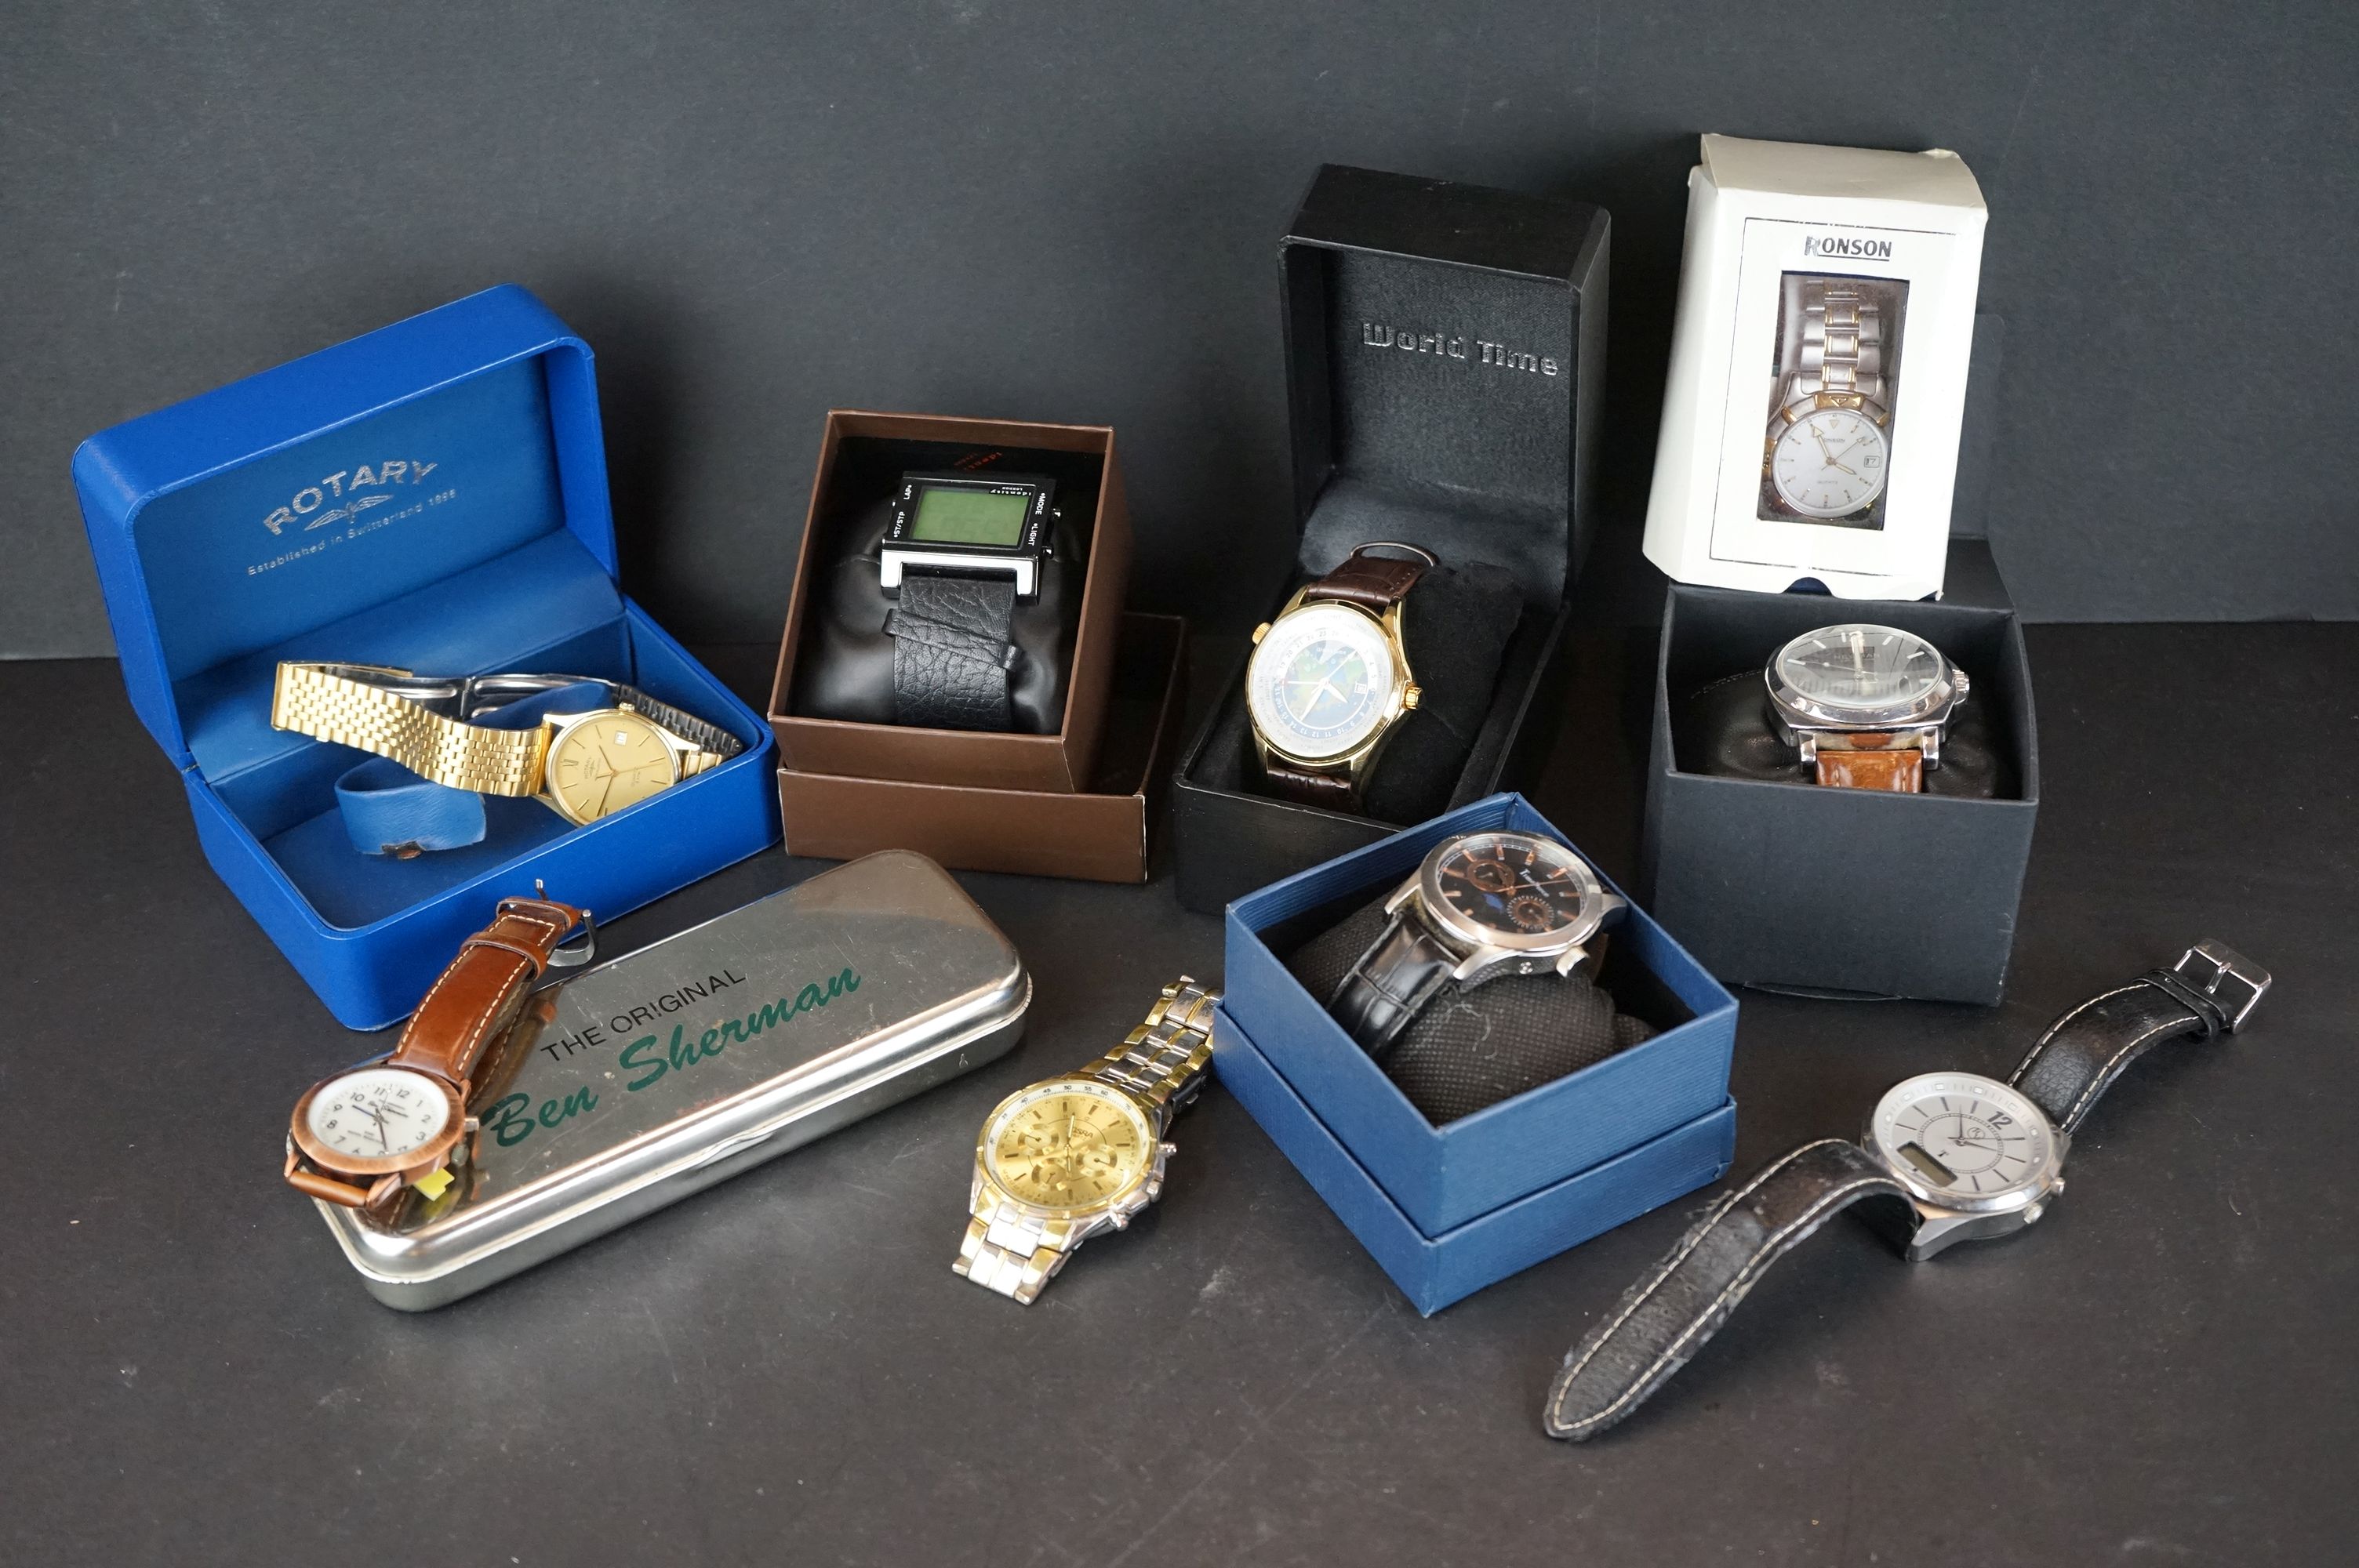 Assorted watches to include Identity, Ben Sherman, Rotary, World Time, Chronographs, etc